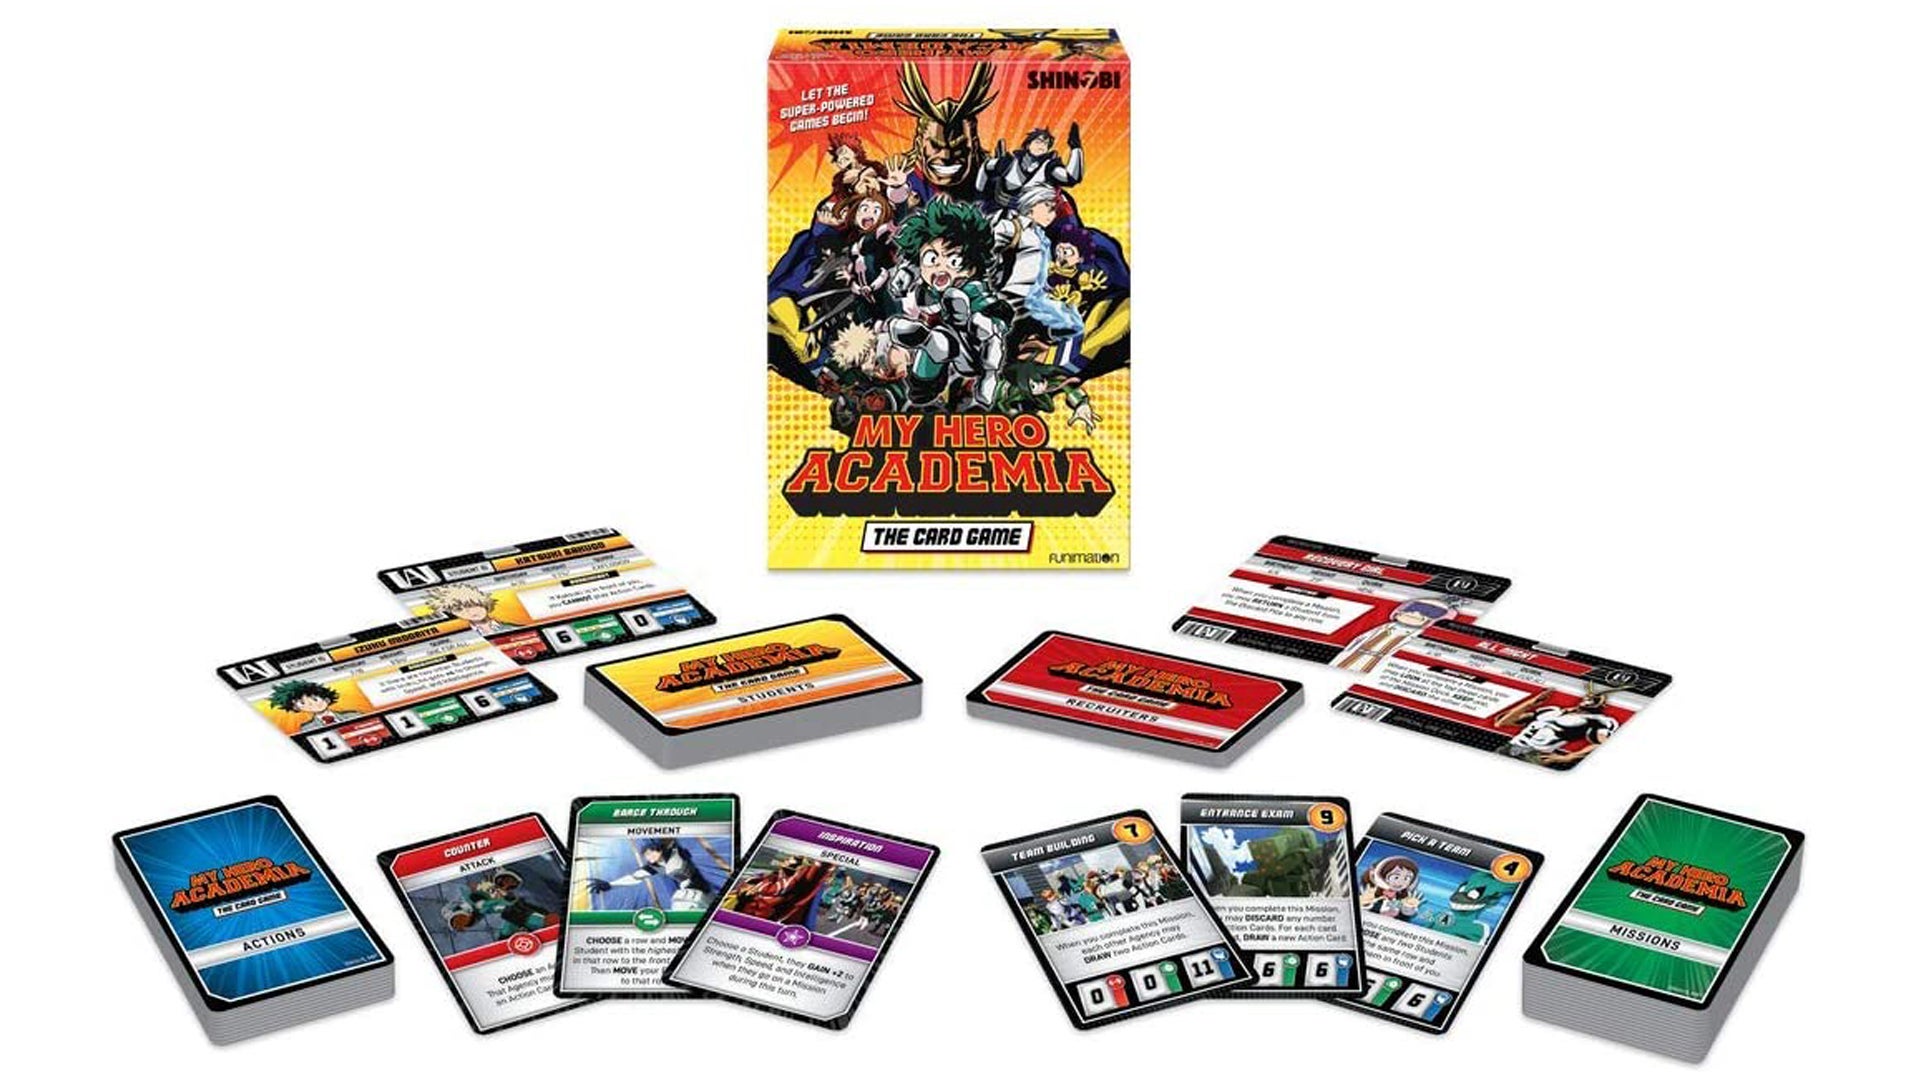 10 best anime board games, from Dragon Ball Super to My Hero Academia |  Dicebreaker